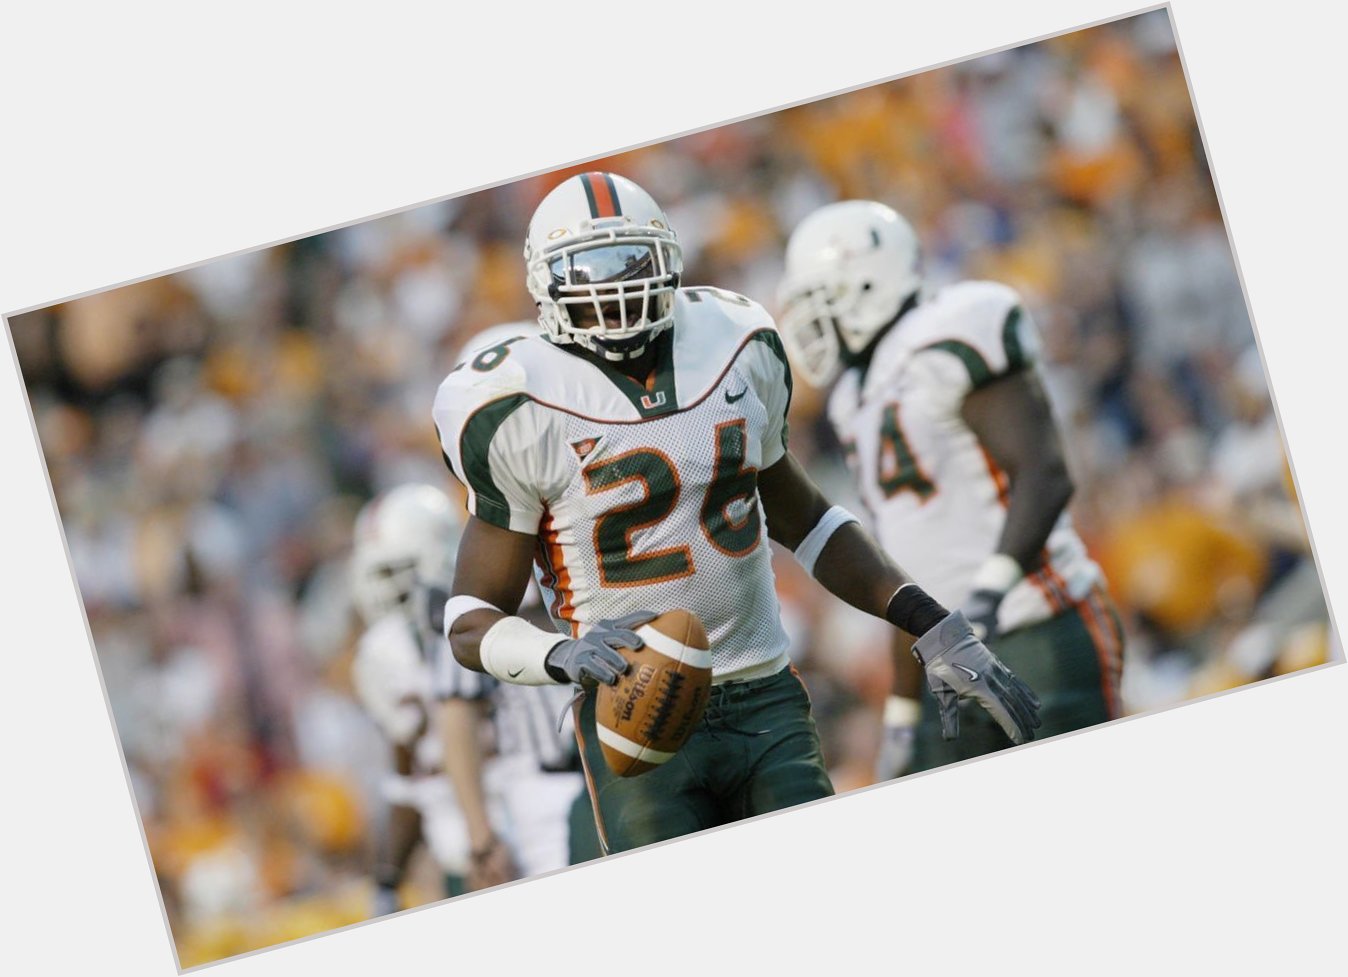 Happy birthday to one of the best safeties to ever do it, RIP Sean Taylor 